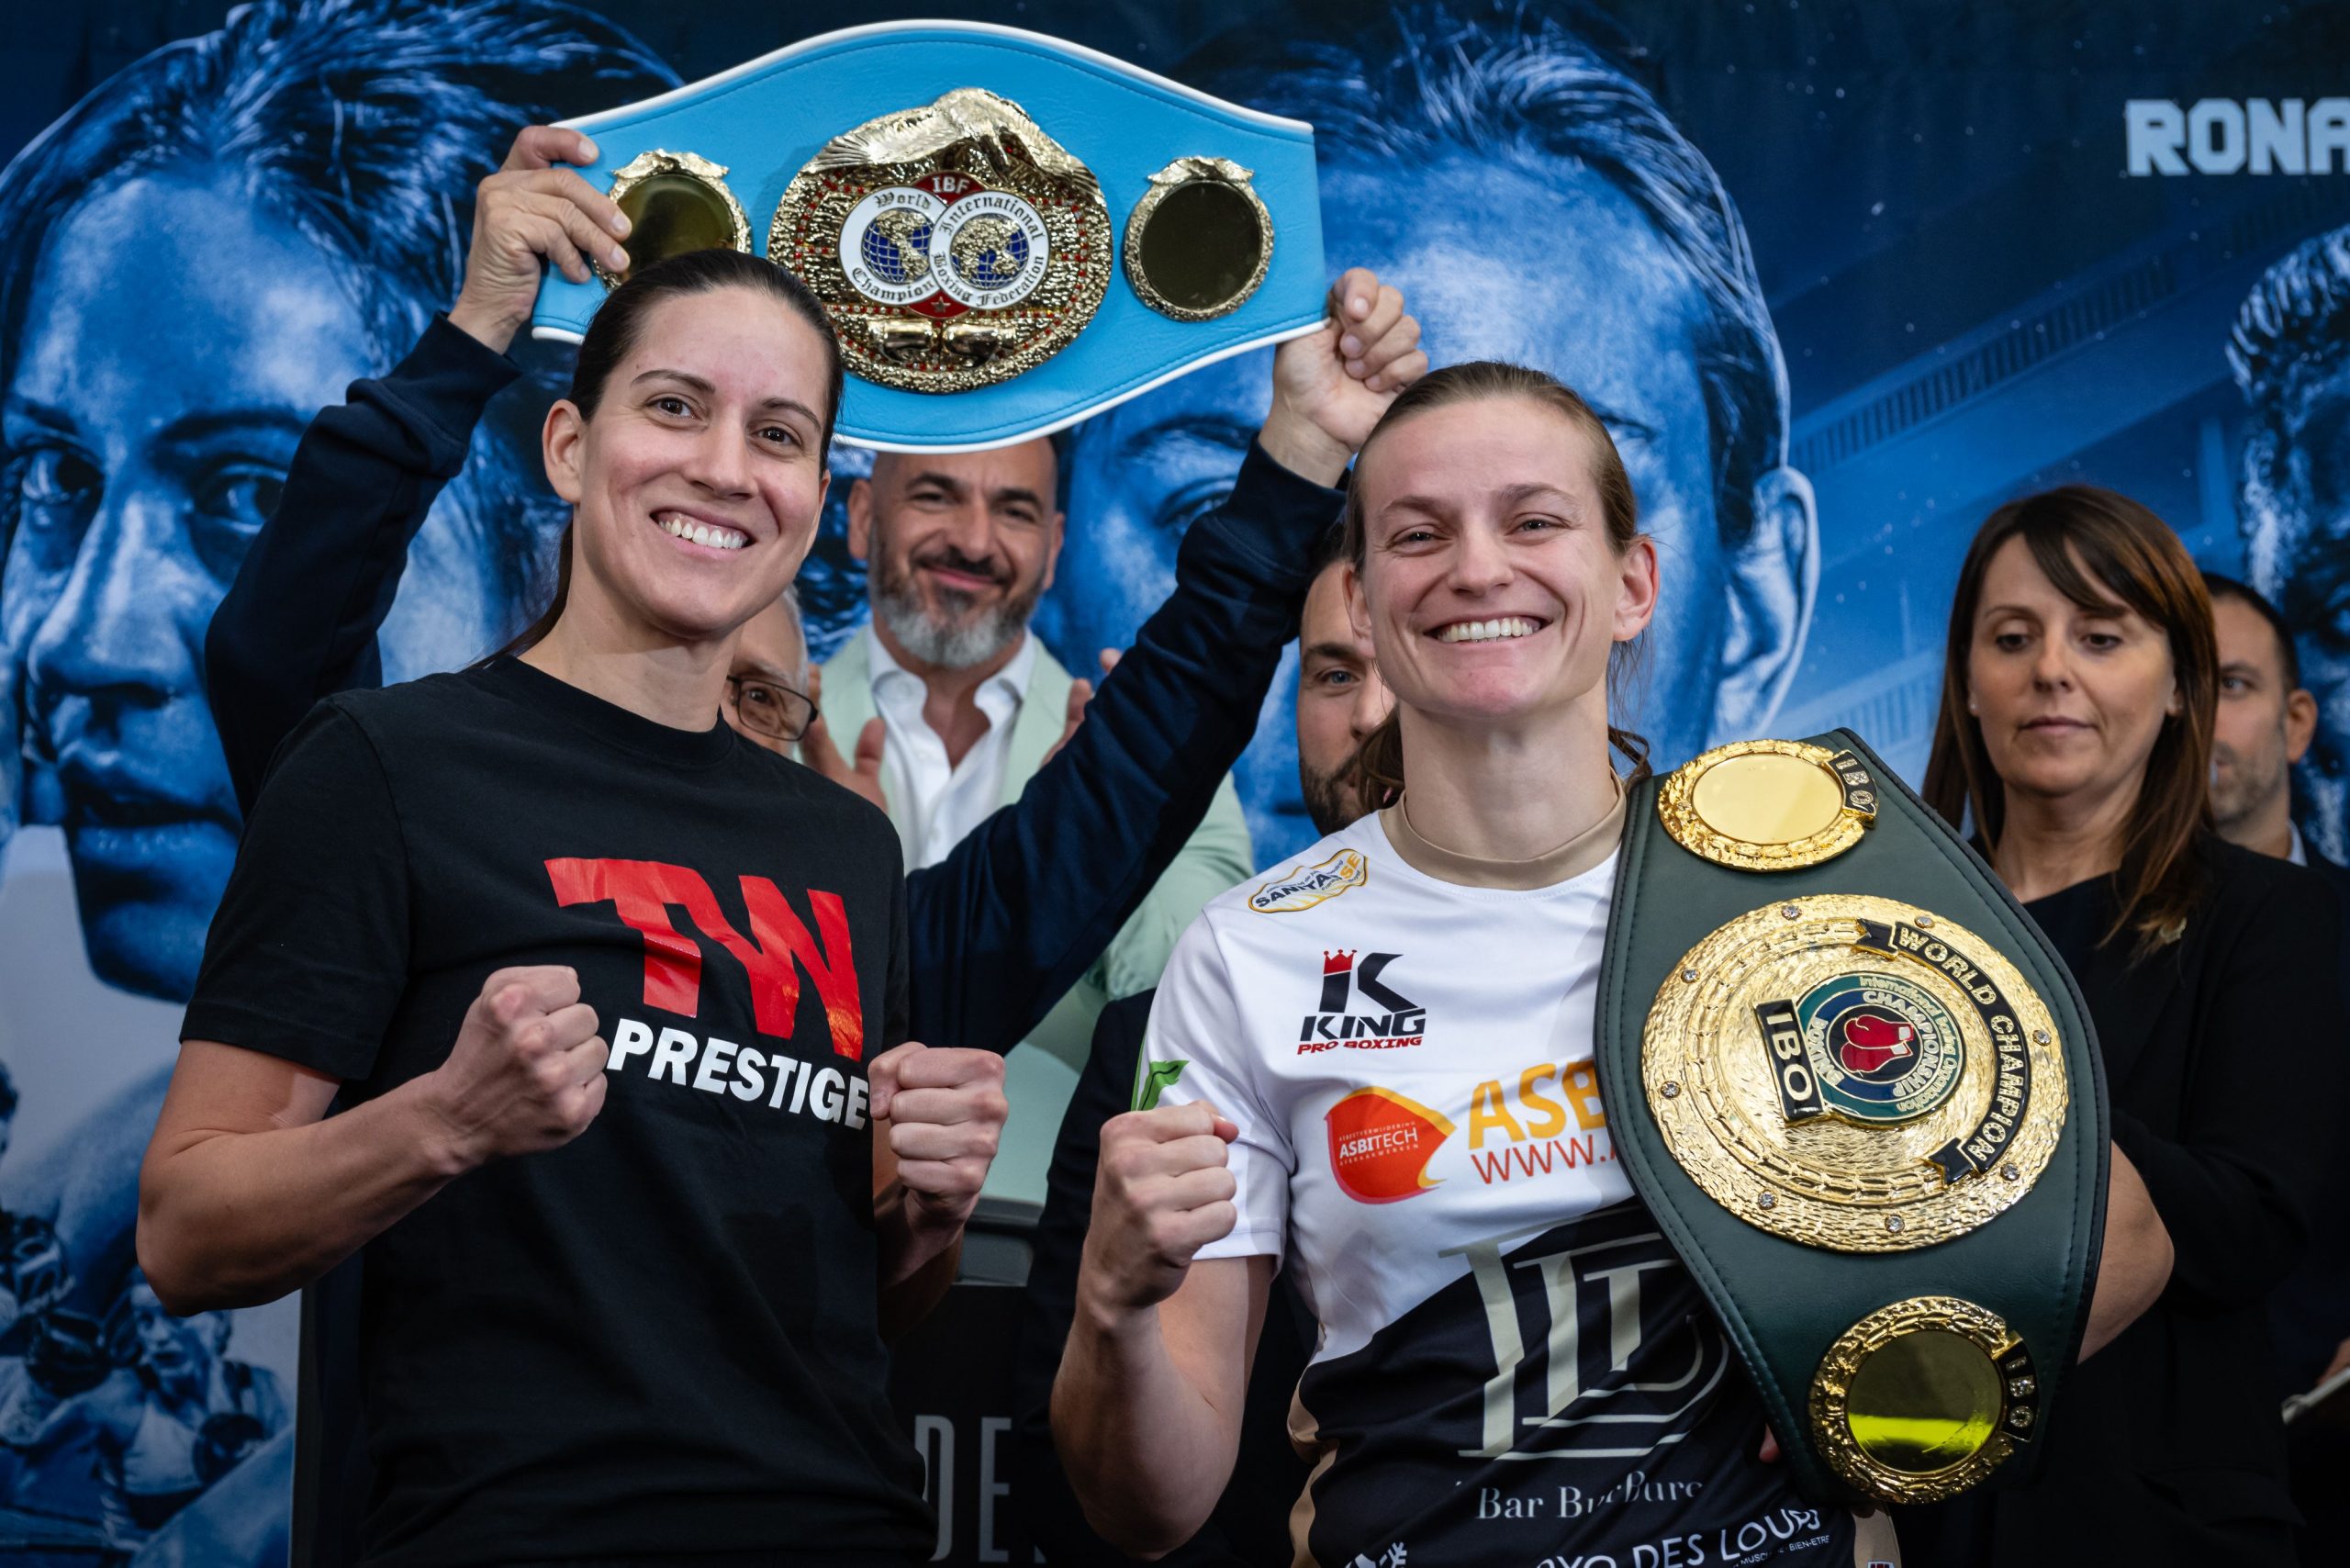 Femke Hermans, Mary Spencer make weight for IBF junior middleweight title match